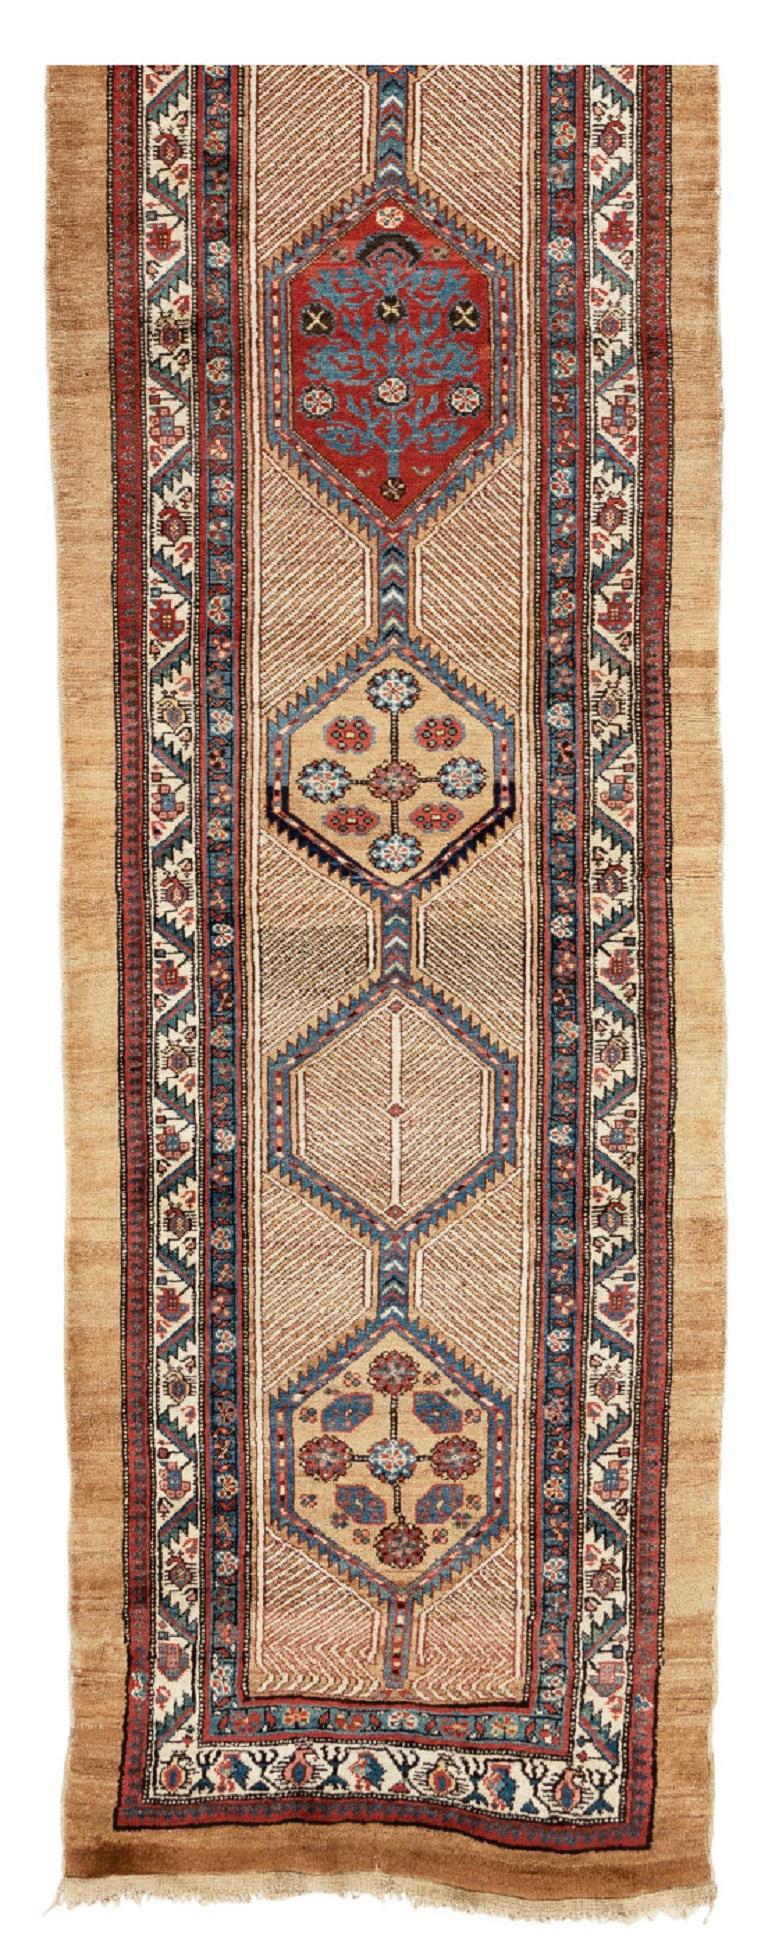 Antique Persian Serab Runner Rug, 19th Century

This classic Serab runner uses a copious camel pile and a distinctive split herringbone pattern in the field. Against this, a column of seven linked medallions float in a repeat pattern centering on a